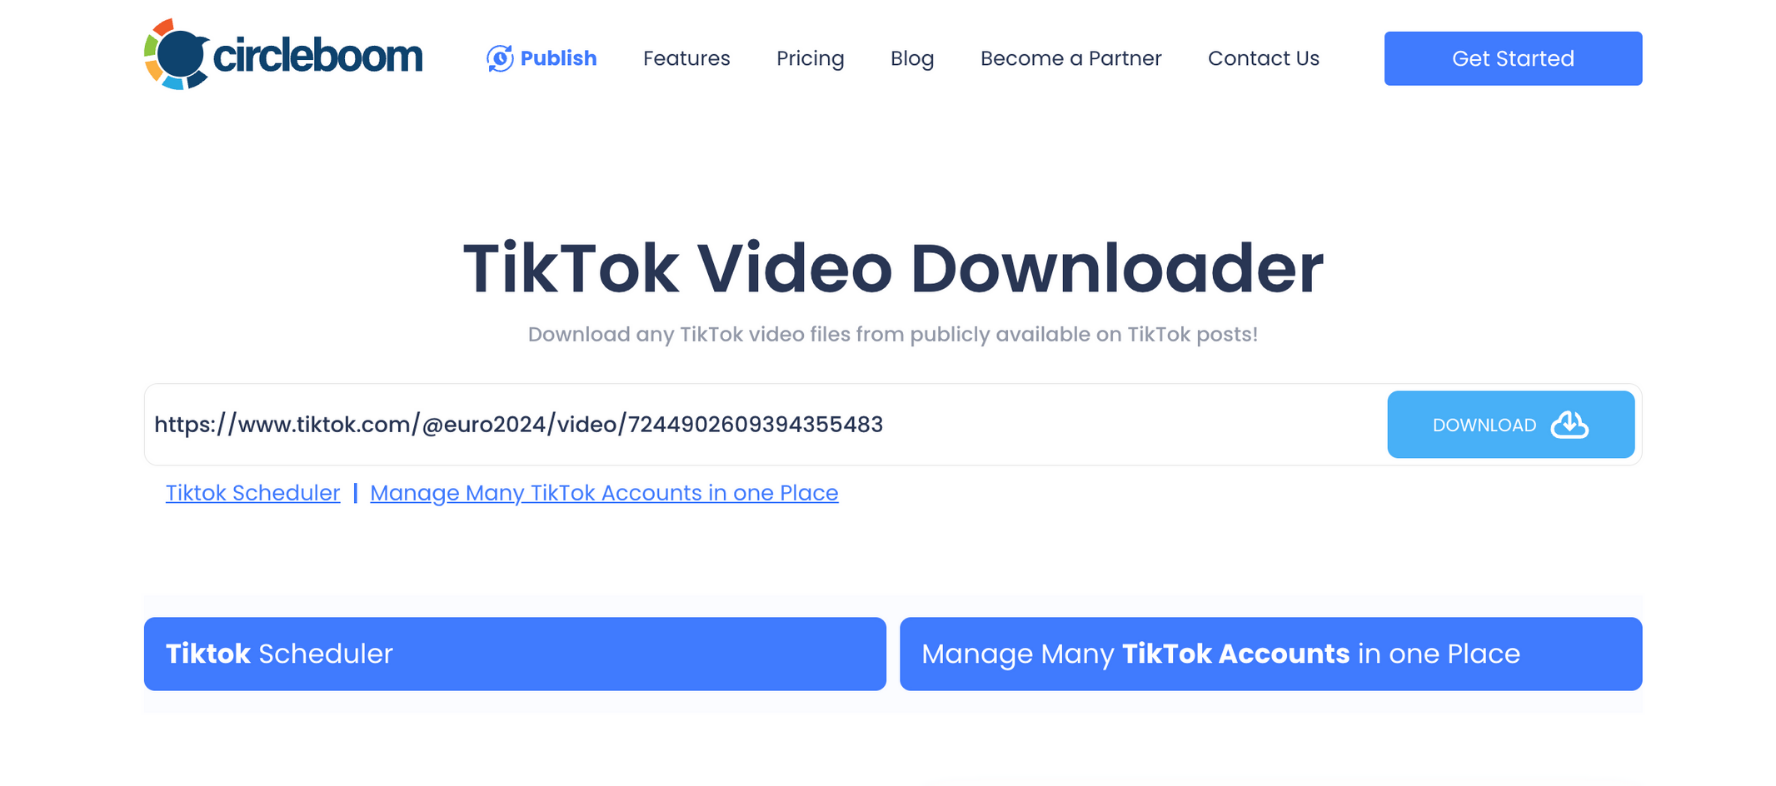 How can I share a TikTok video on Instagram?